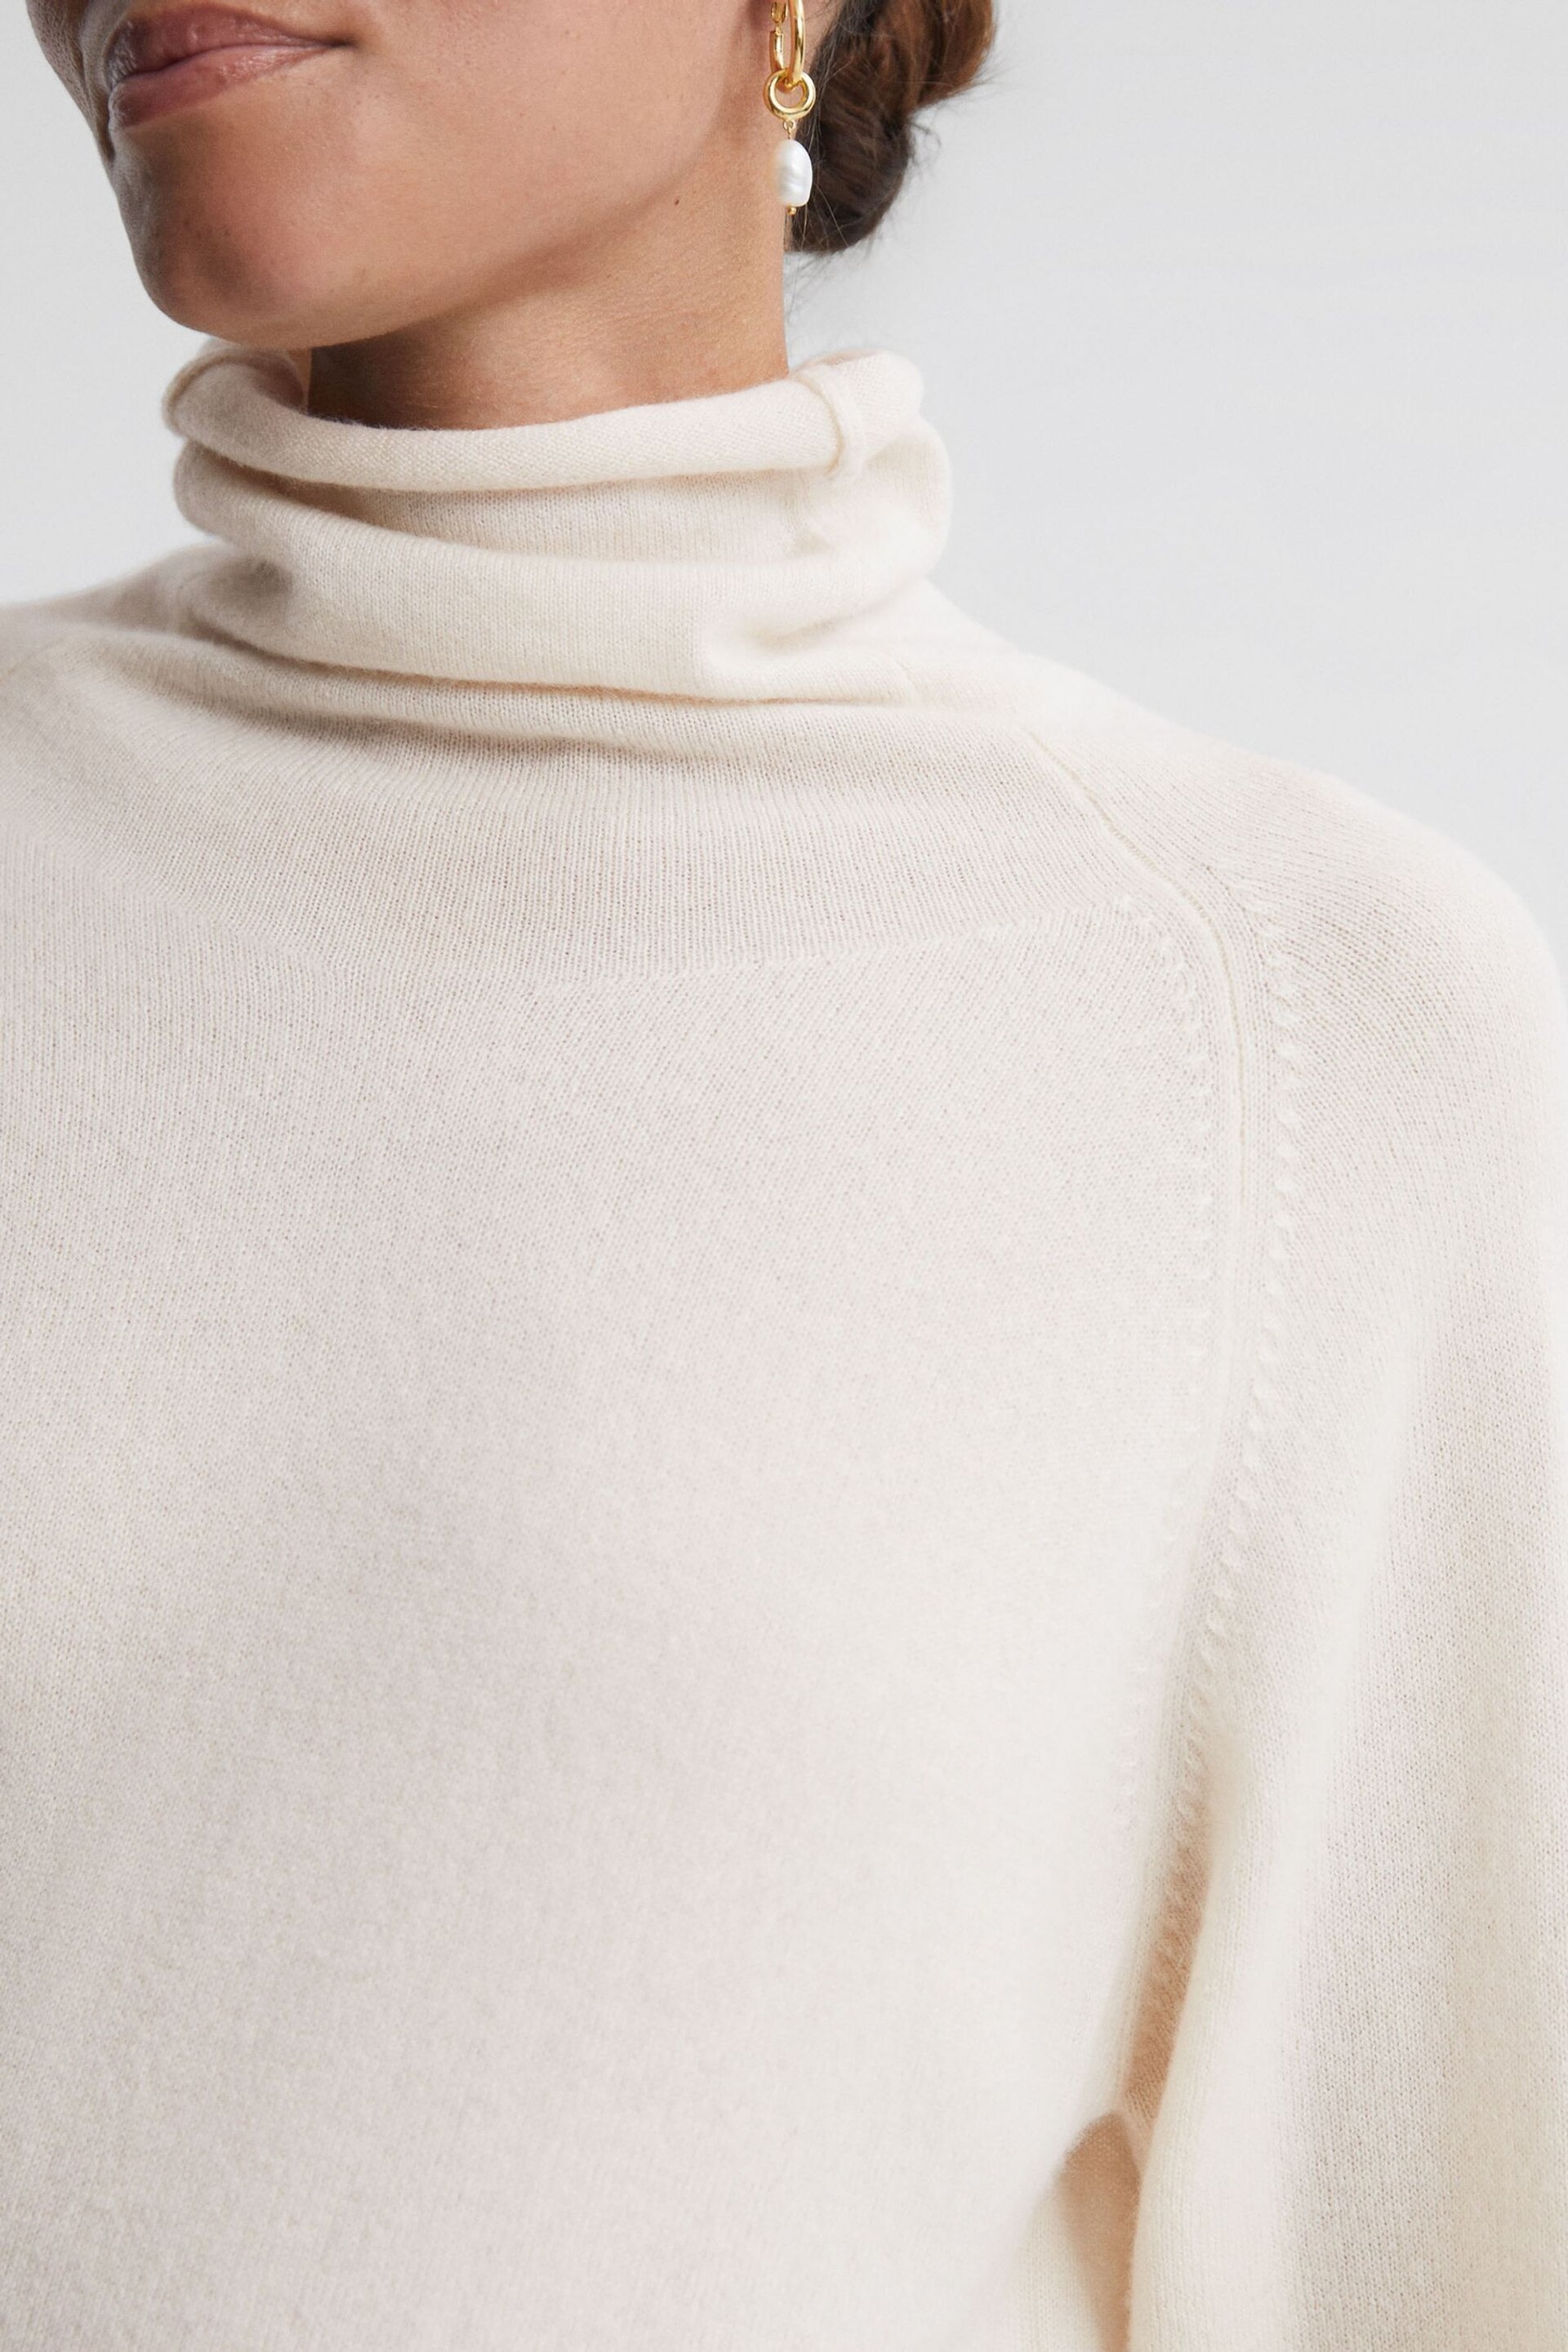 Reiss Cream Florence Relaxed Cashmere Roll Neck Top - Image 1 of 7